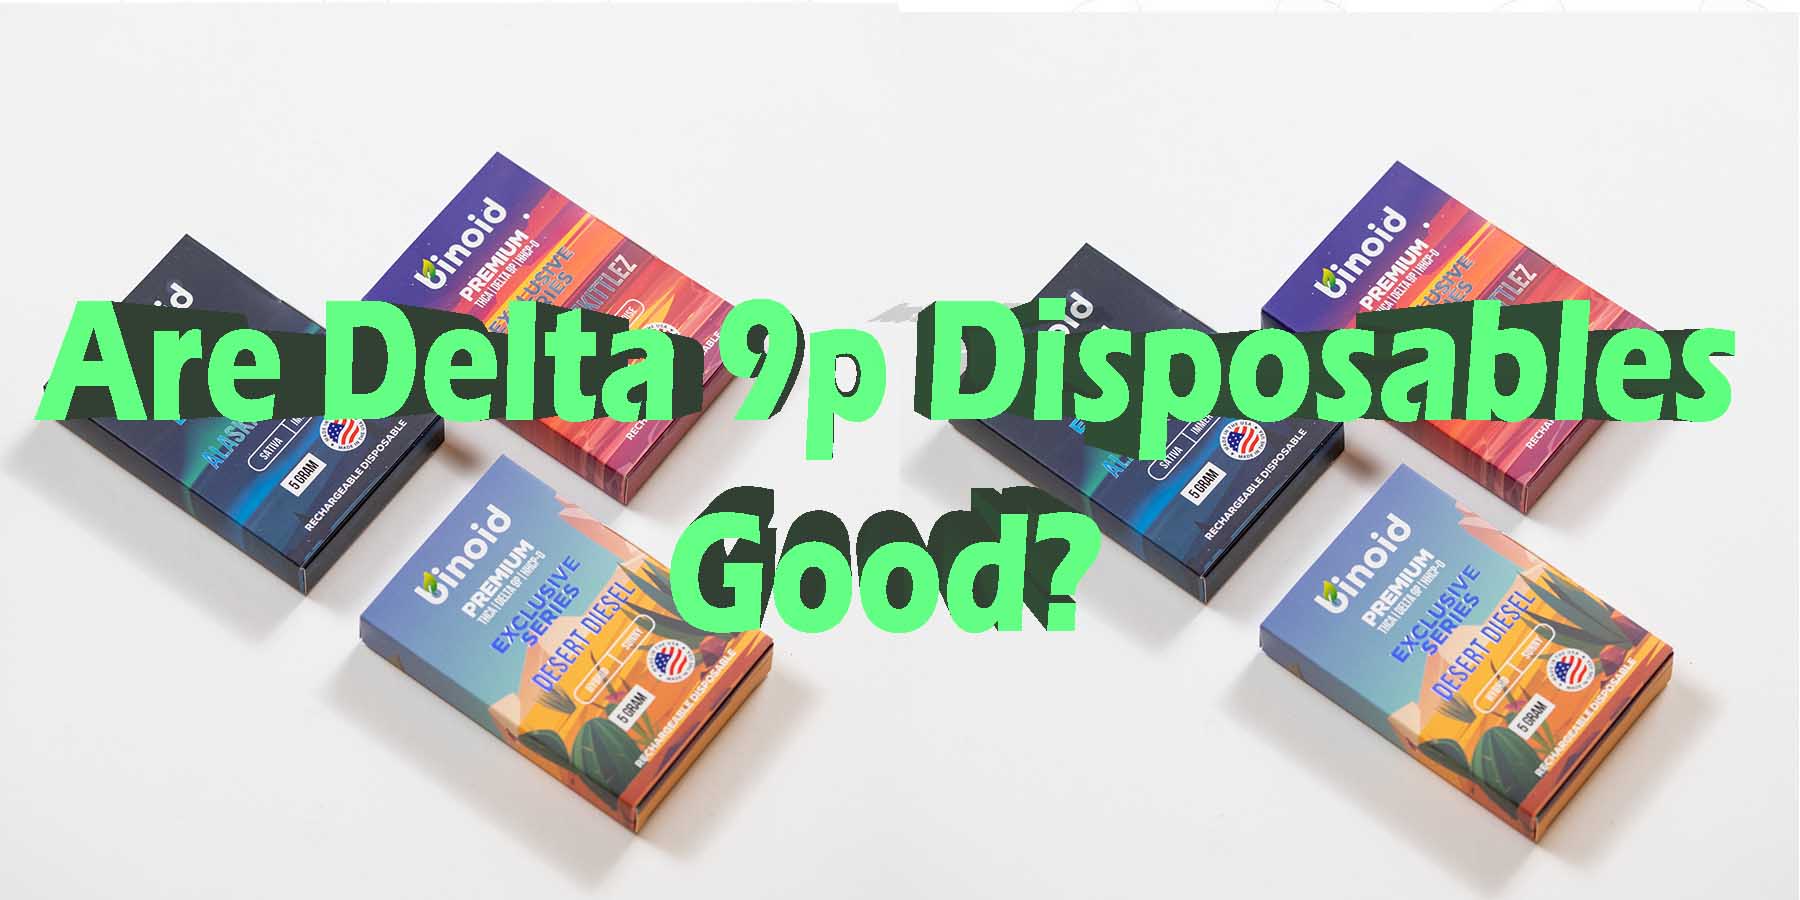 Are Delta 9p Disposables Good WhereToGet HowToGetNearMe BestPlace LowestPrice Coupon Discount For Smoking Best High Smoke Shop Online Near Me StrongestBrand BestBrand Binoid Bloomz.